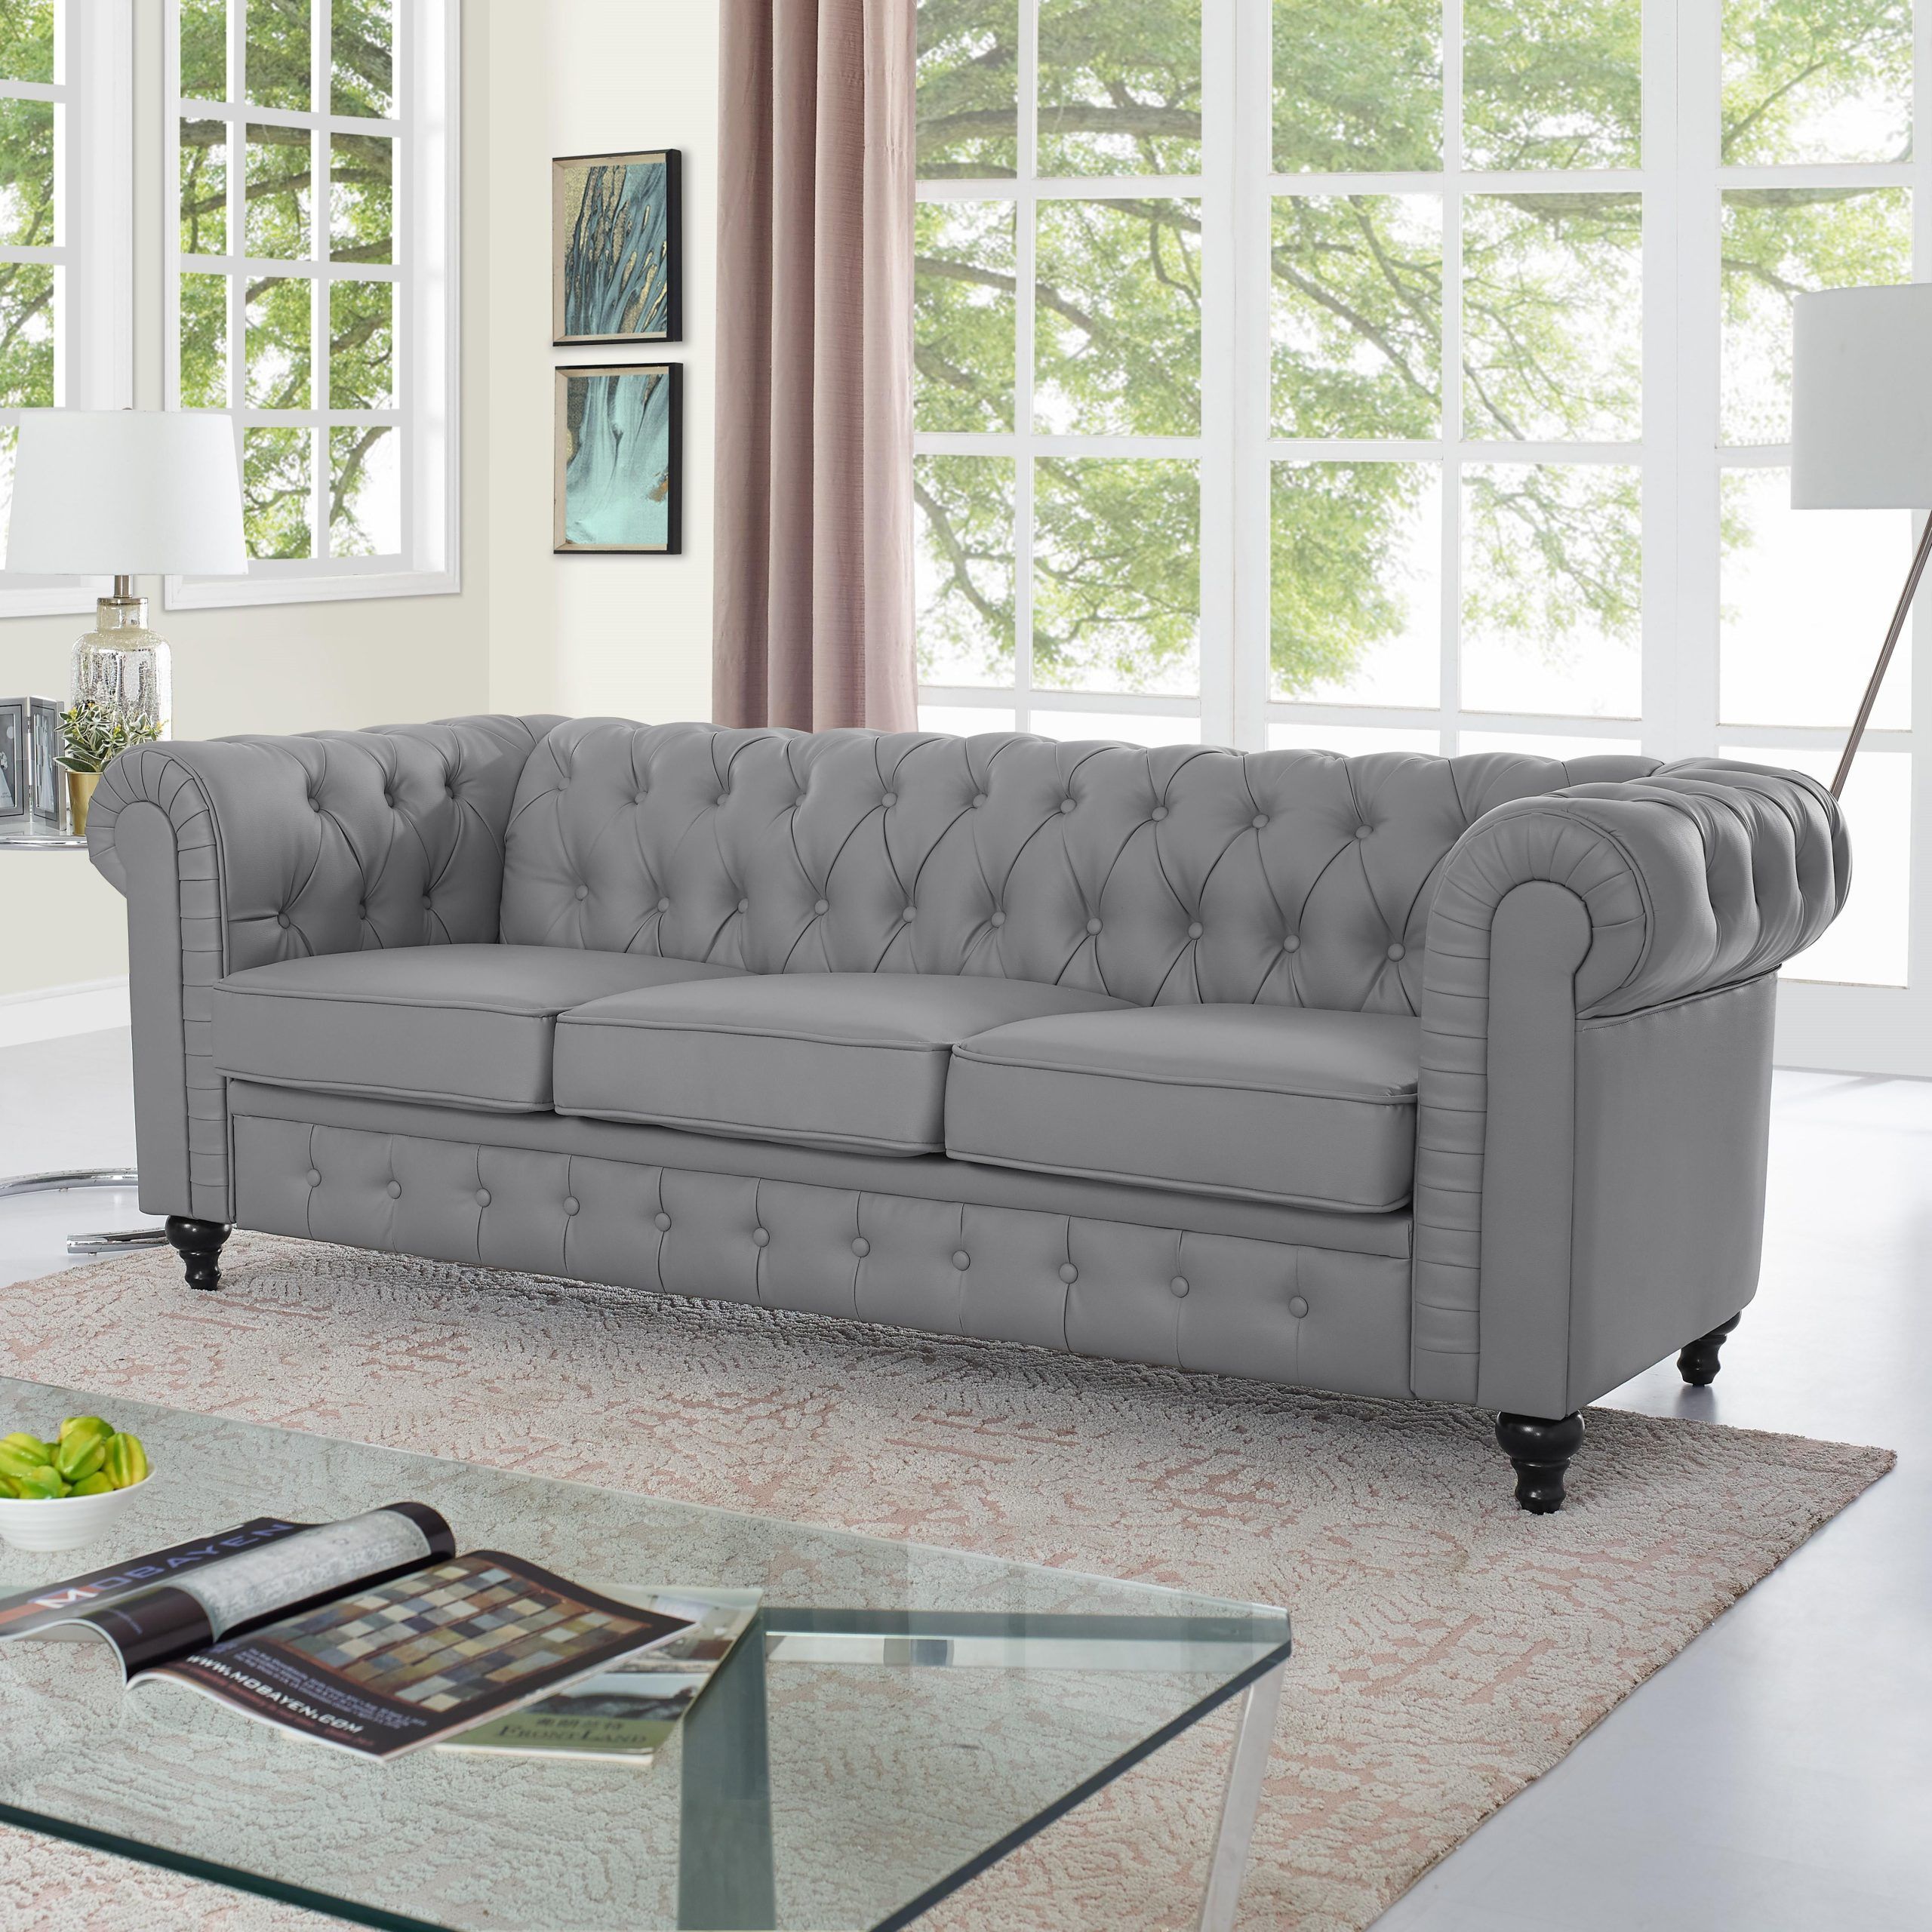 Emery Chesterfield Sofa With Rolled Arms, Tufted Cushionsnaomi Home Regarding Chesterfield Sofas (View 7 of 20)